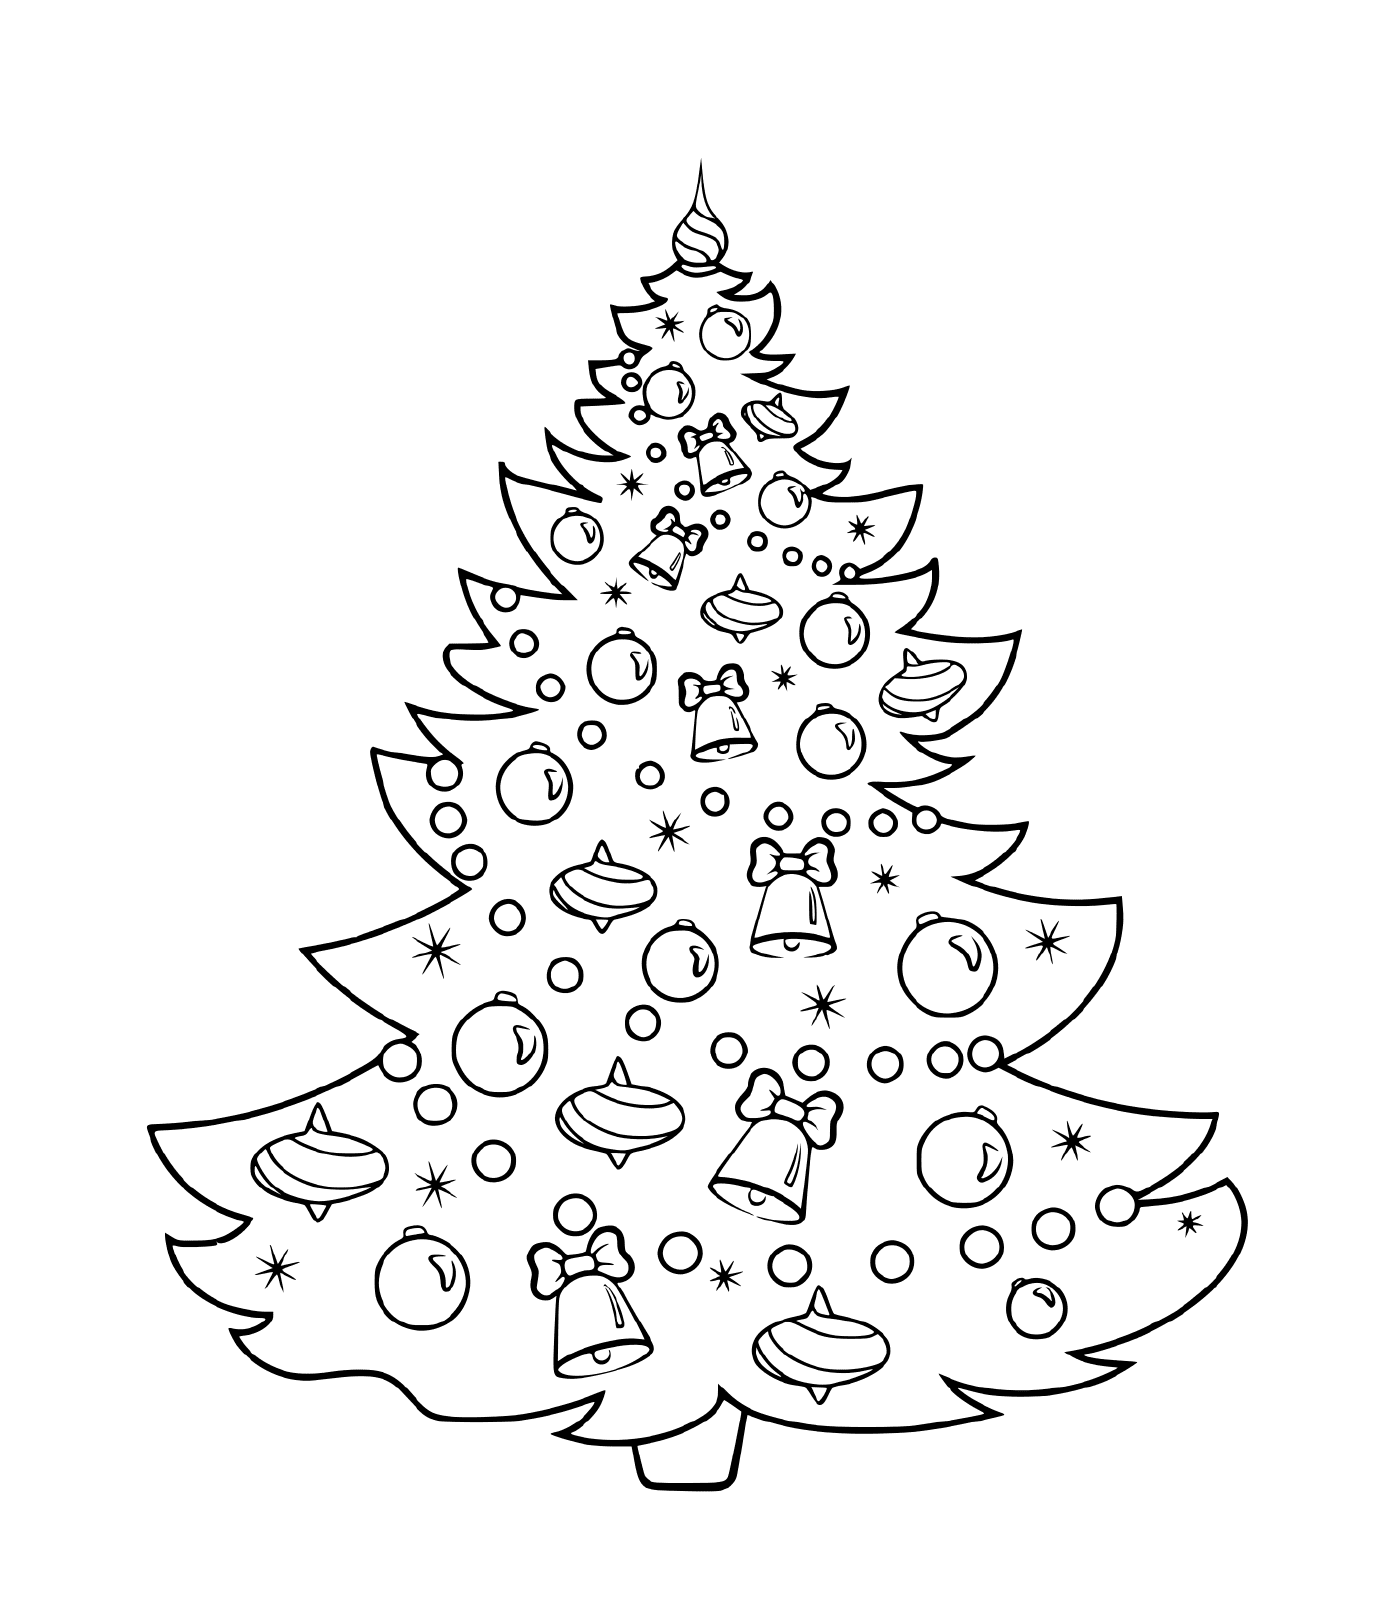  Christmas tree with balls, bells and garlands 